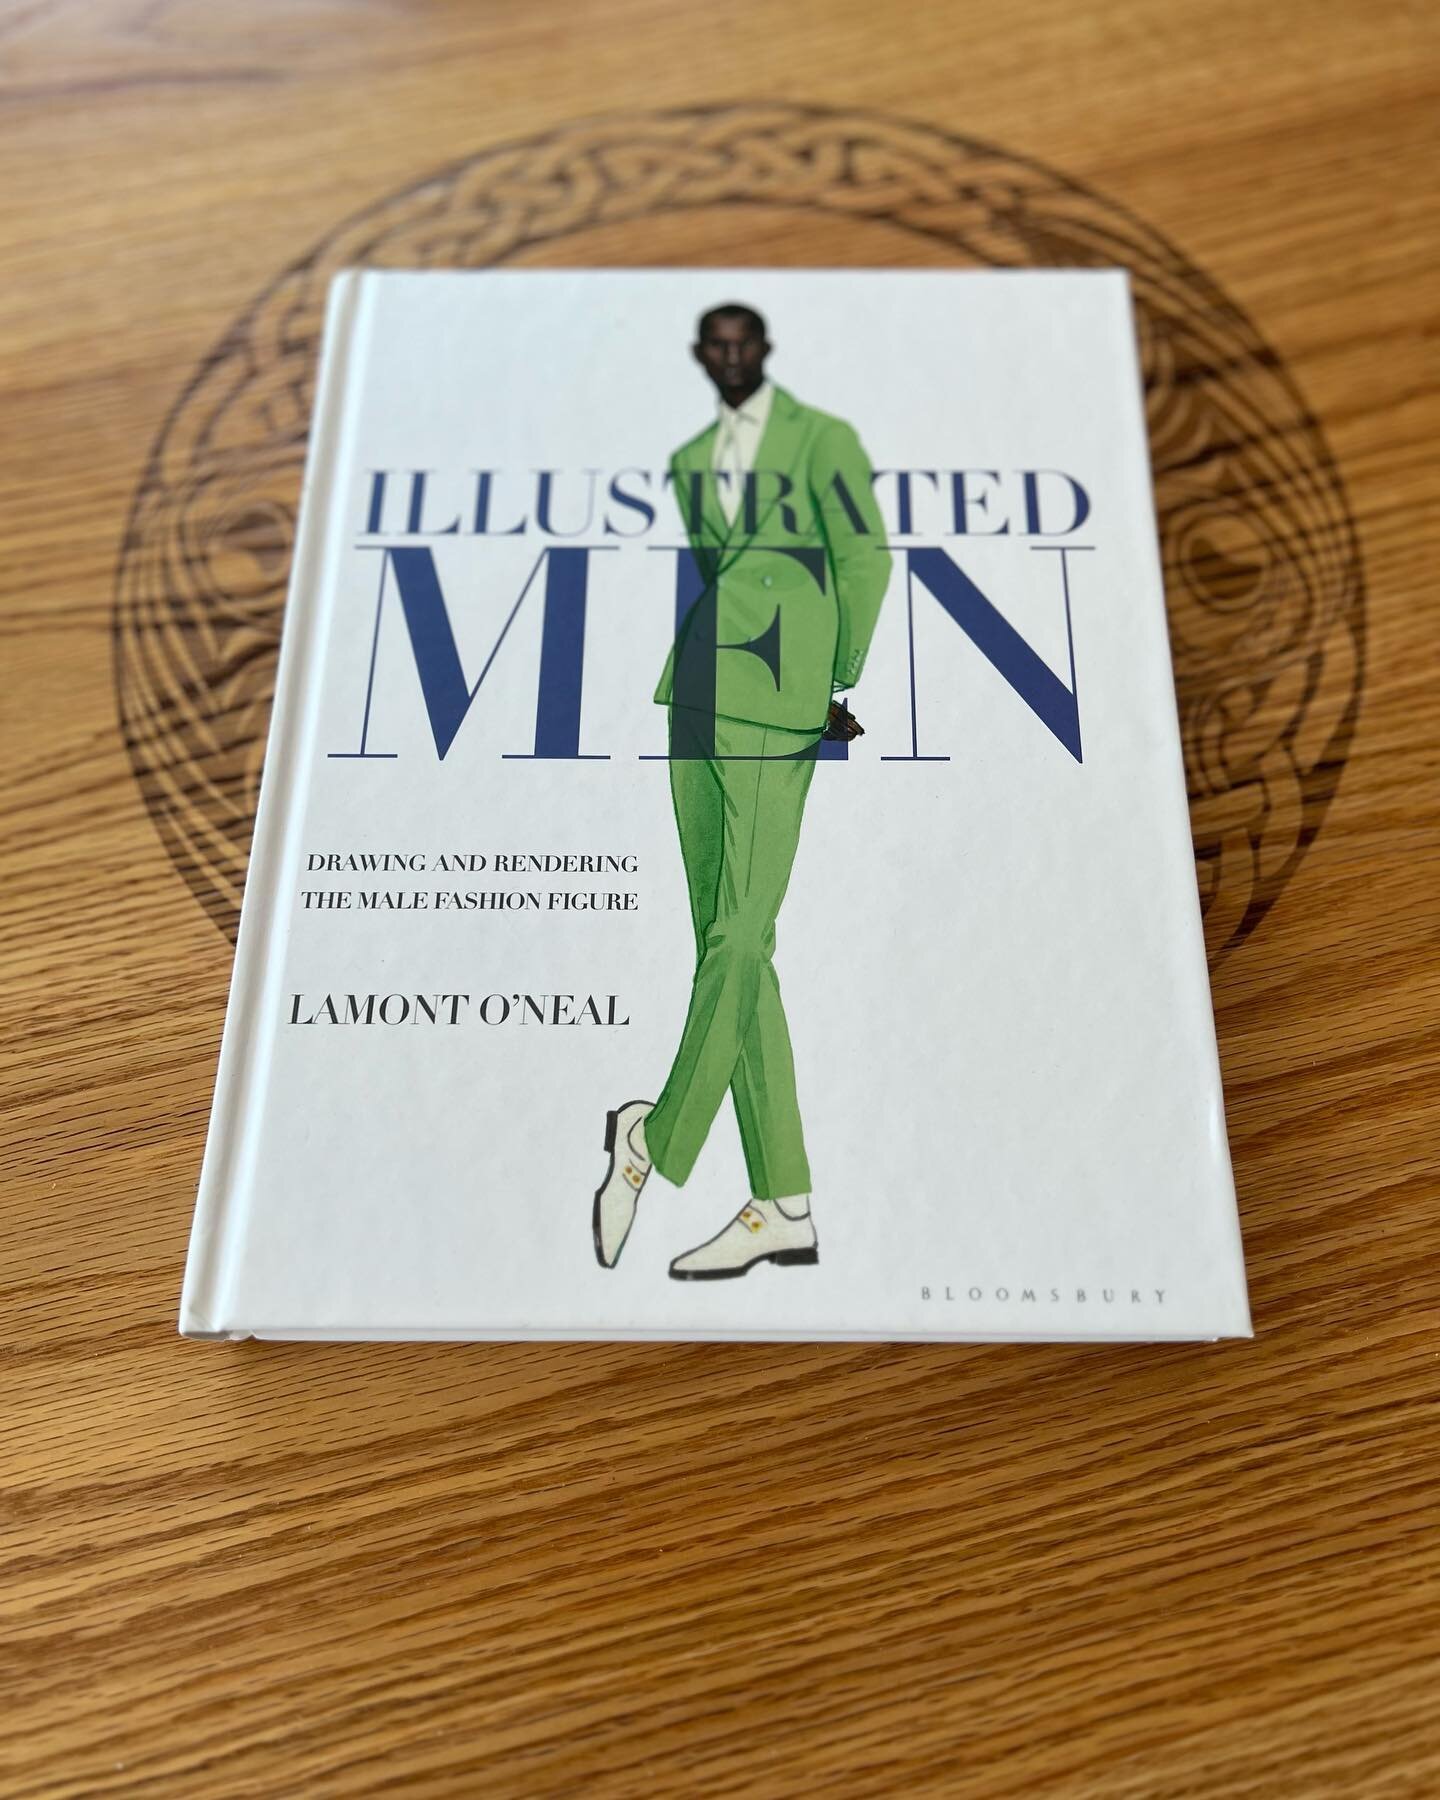 It&rsquo;s finally here!!! One of my fashion illustration HEROES, @oneallamont Lamont O&rsquo;Neal, has published a very impressive collection of &ldquo;Illustrated Men&rdquo;. This beautifully illustrated and written book should be the cornerstone o